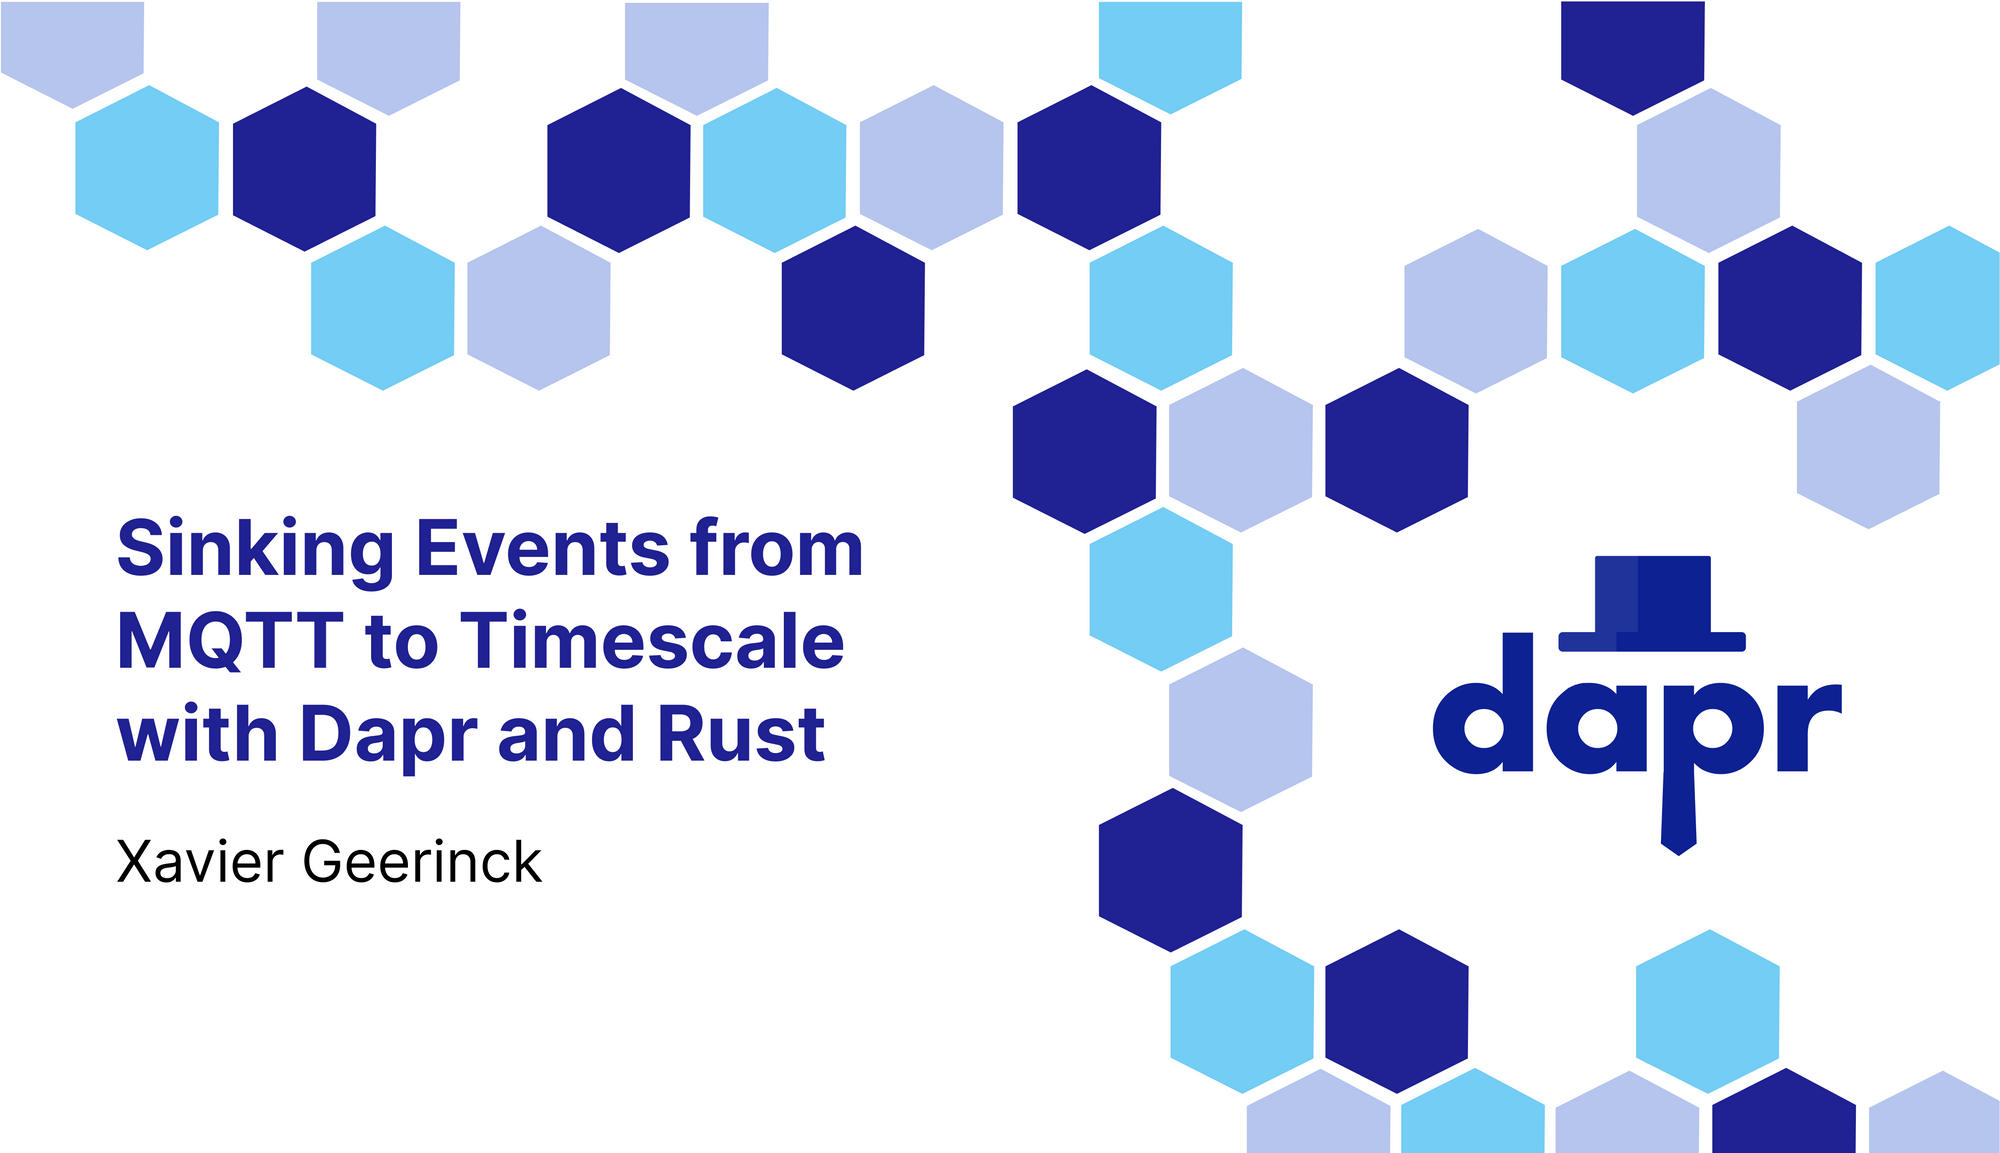 Sinking Events from MQTT to Timescale with Dapr and Rust